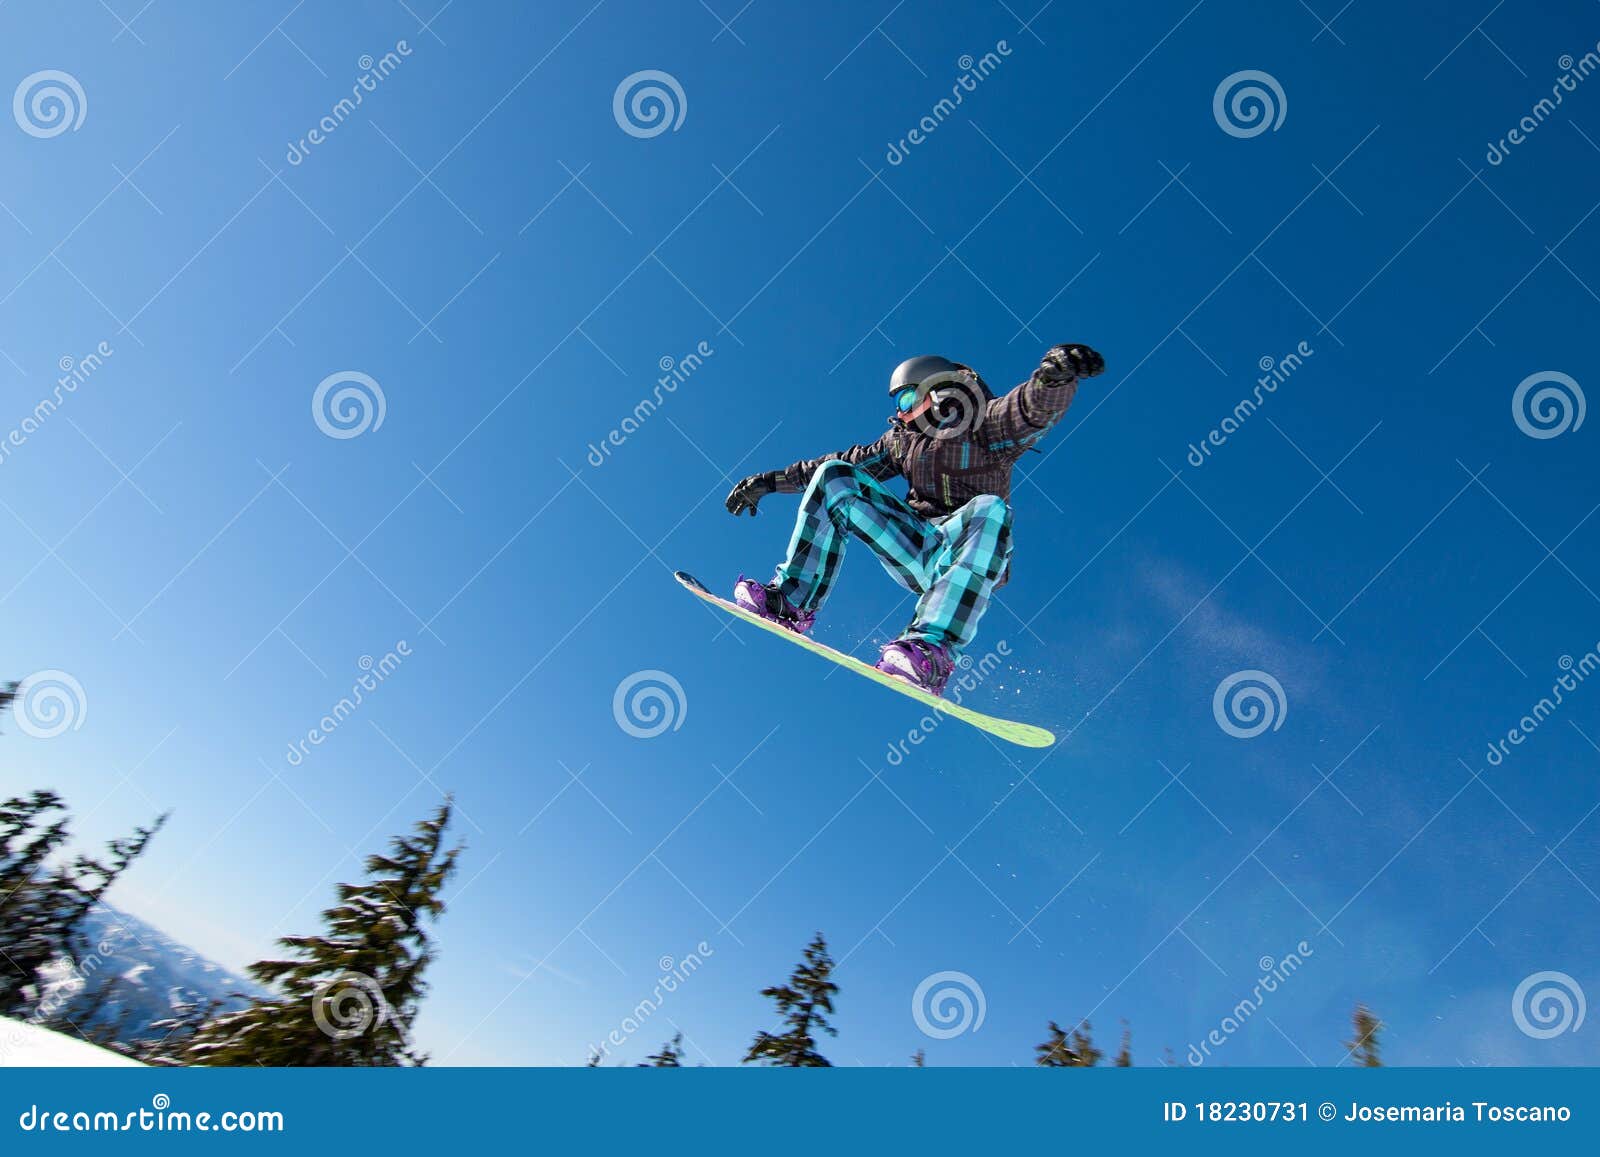 male snowboarder catches big air.